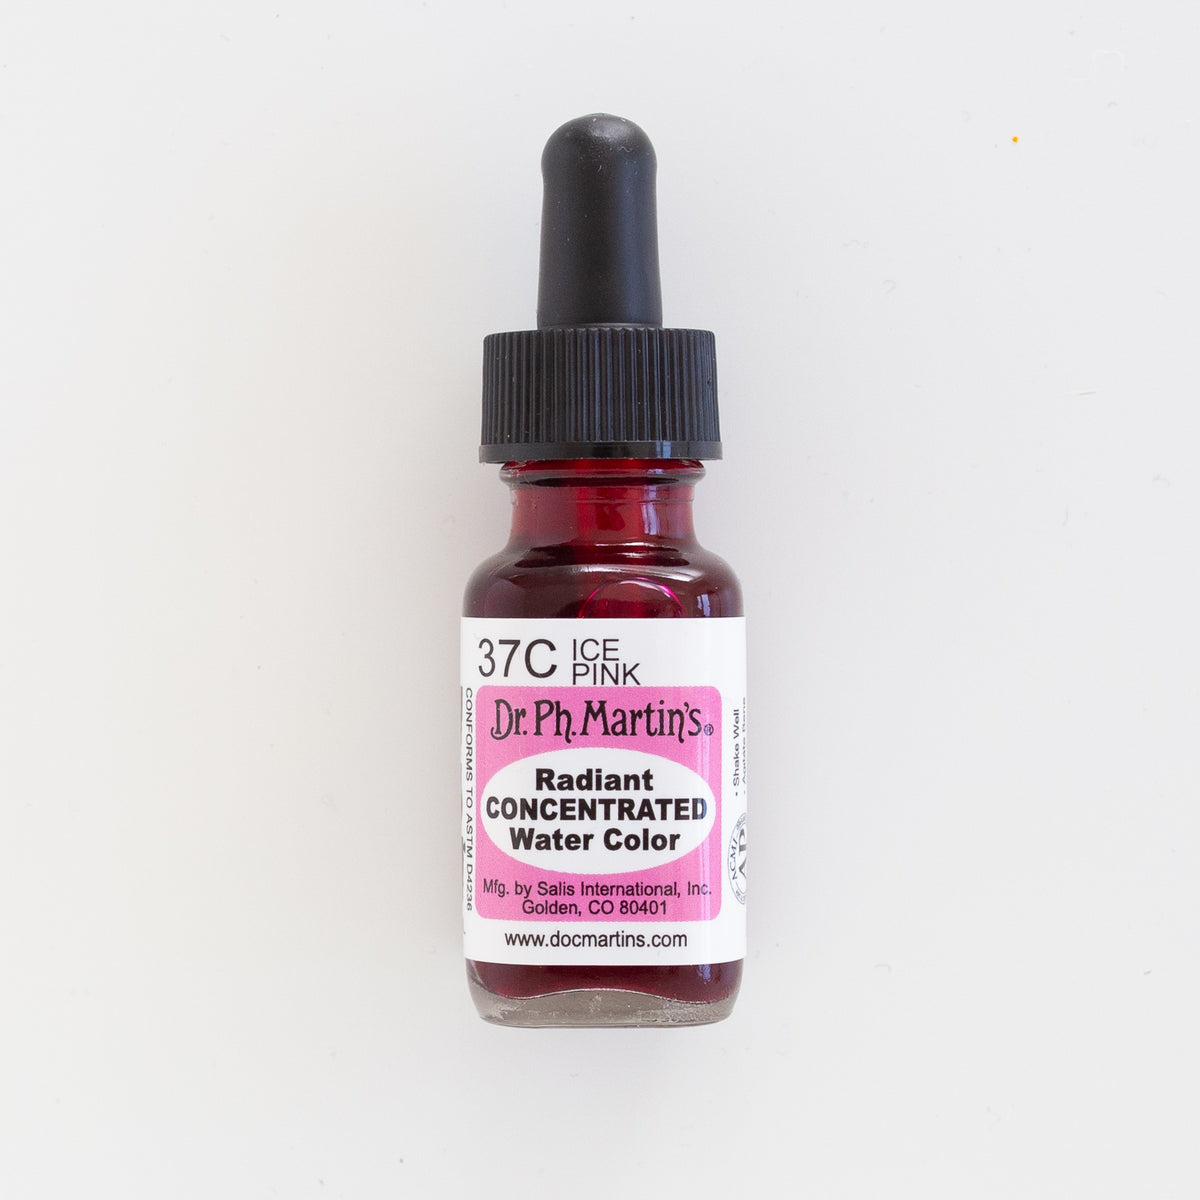 DR. Ph. Martin's Radiant Concentrated 37C Ice Pink